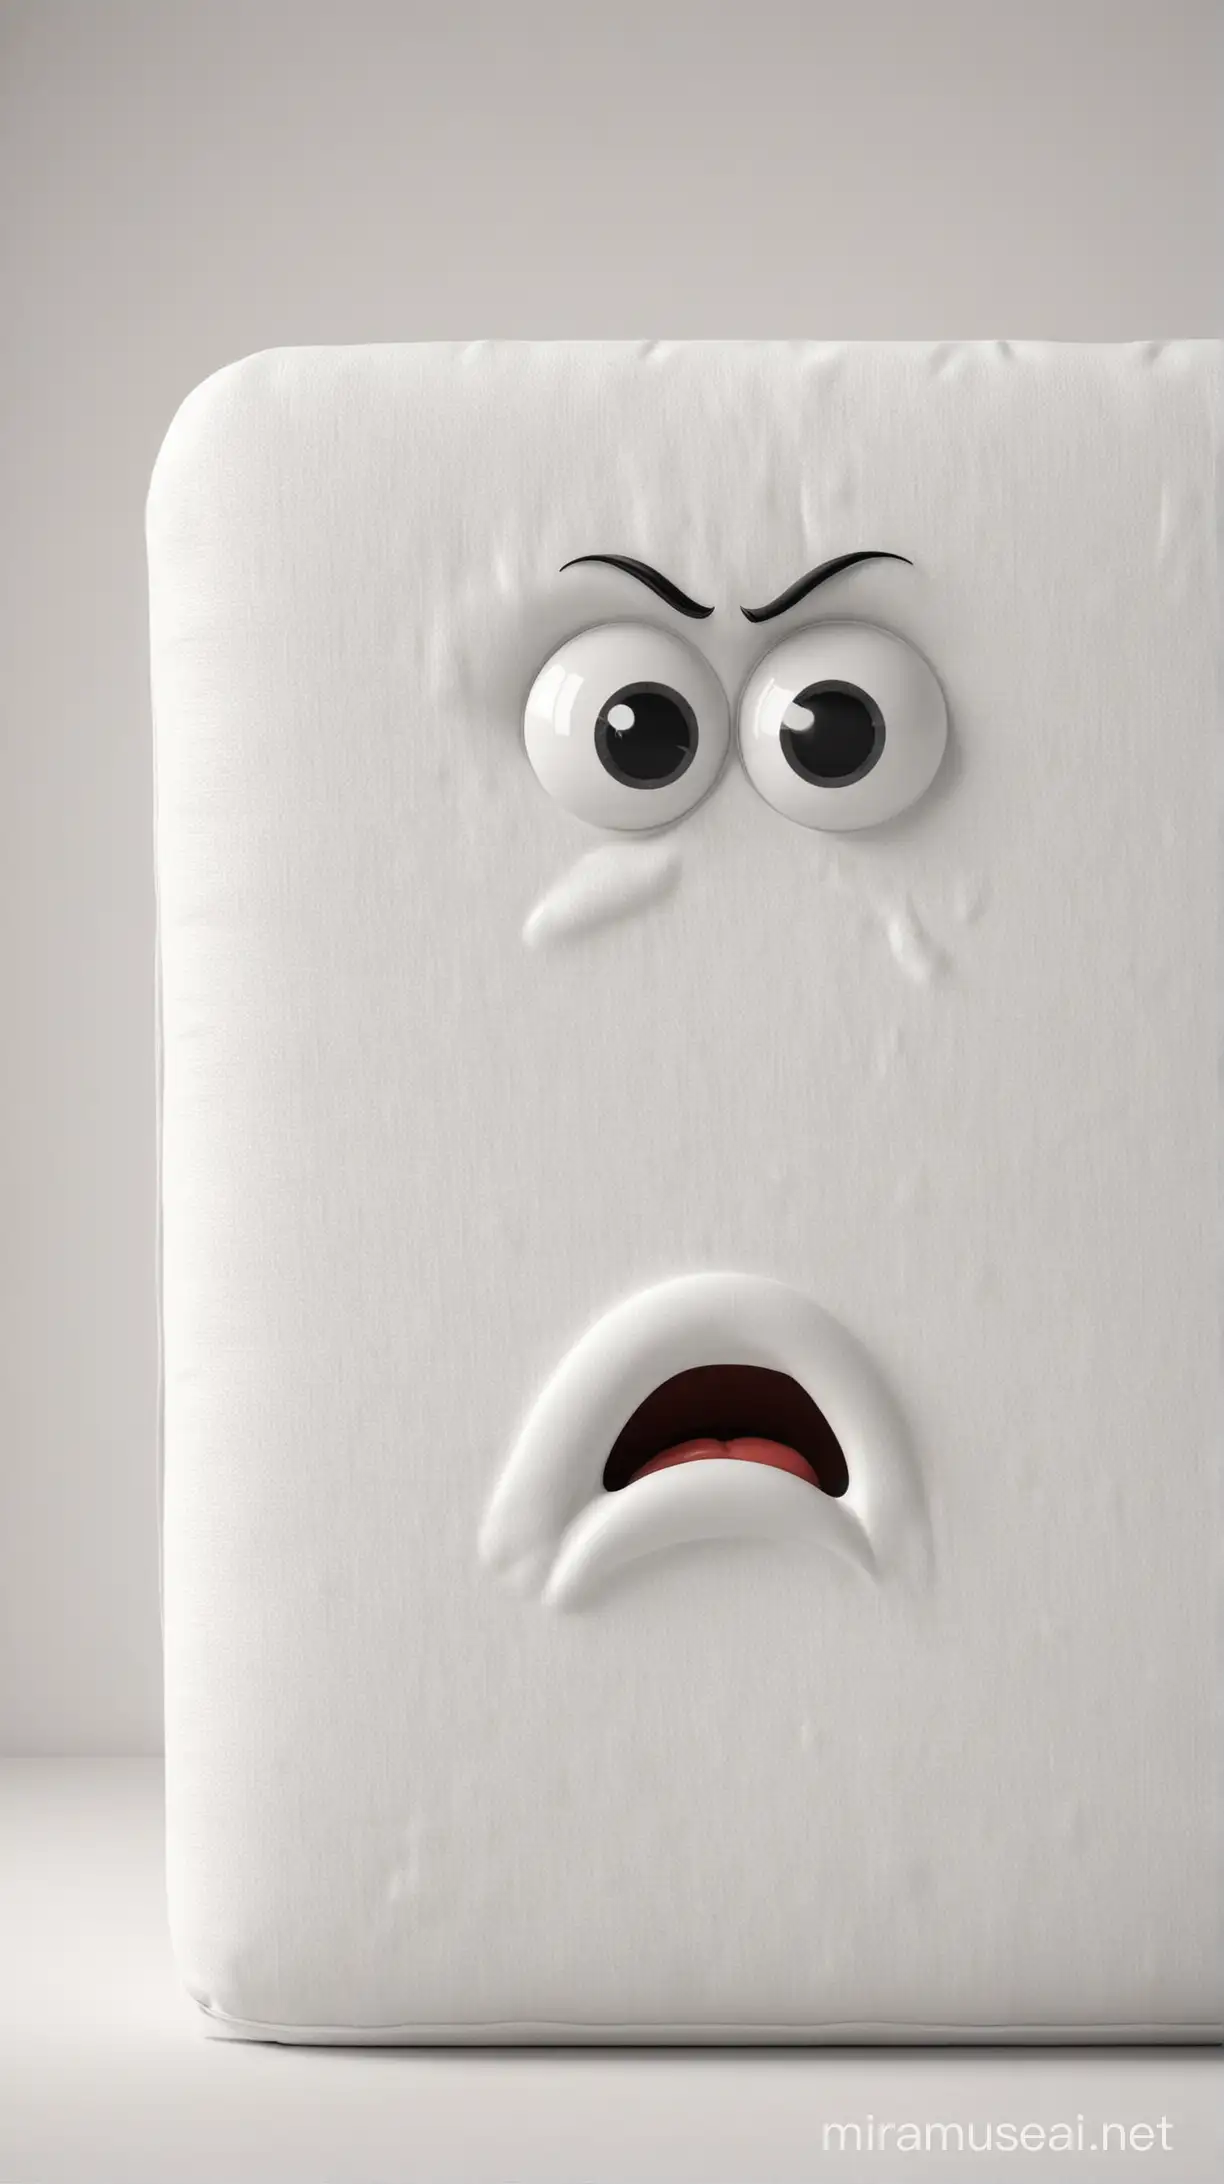 Cunning Angry White Mattress Character with Eyes and Mouth Standing